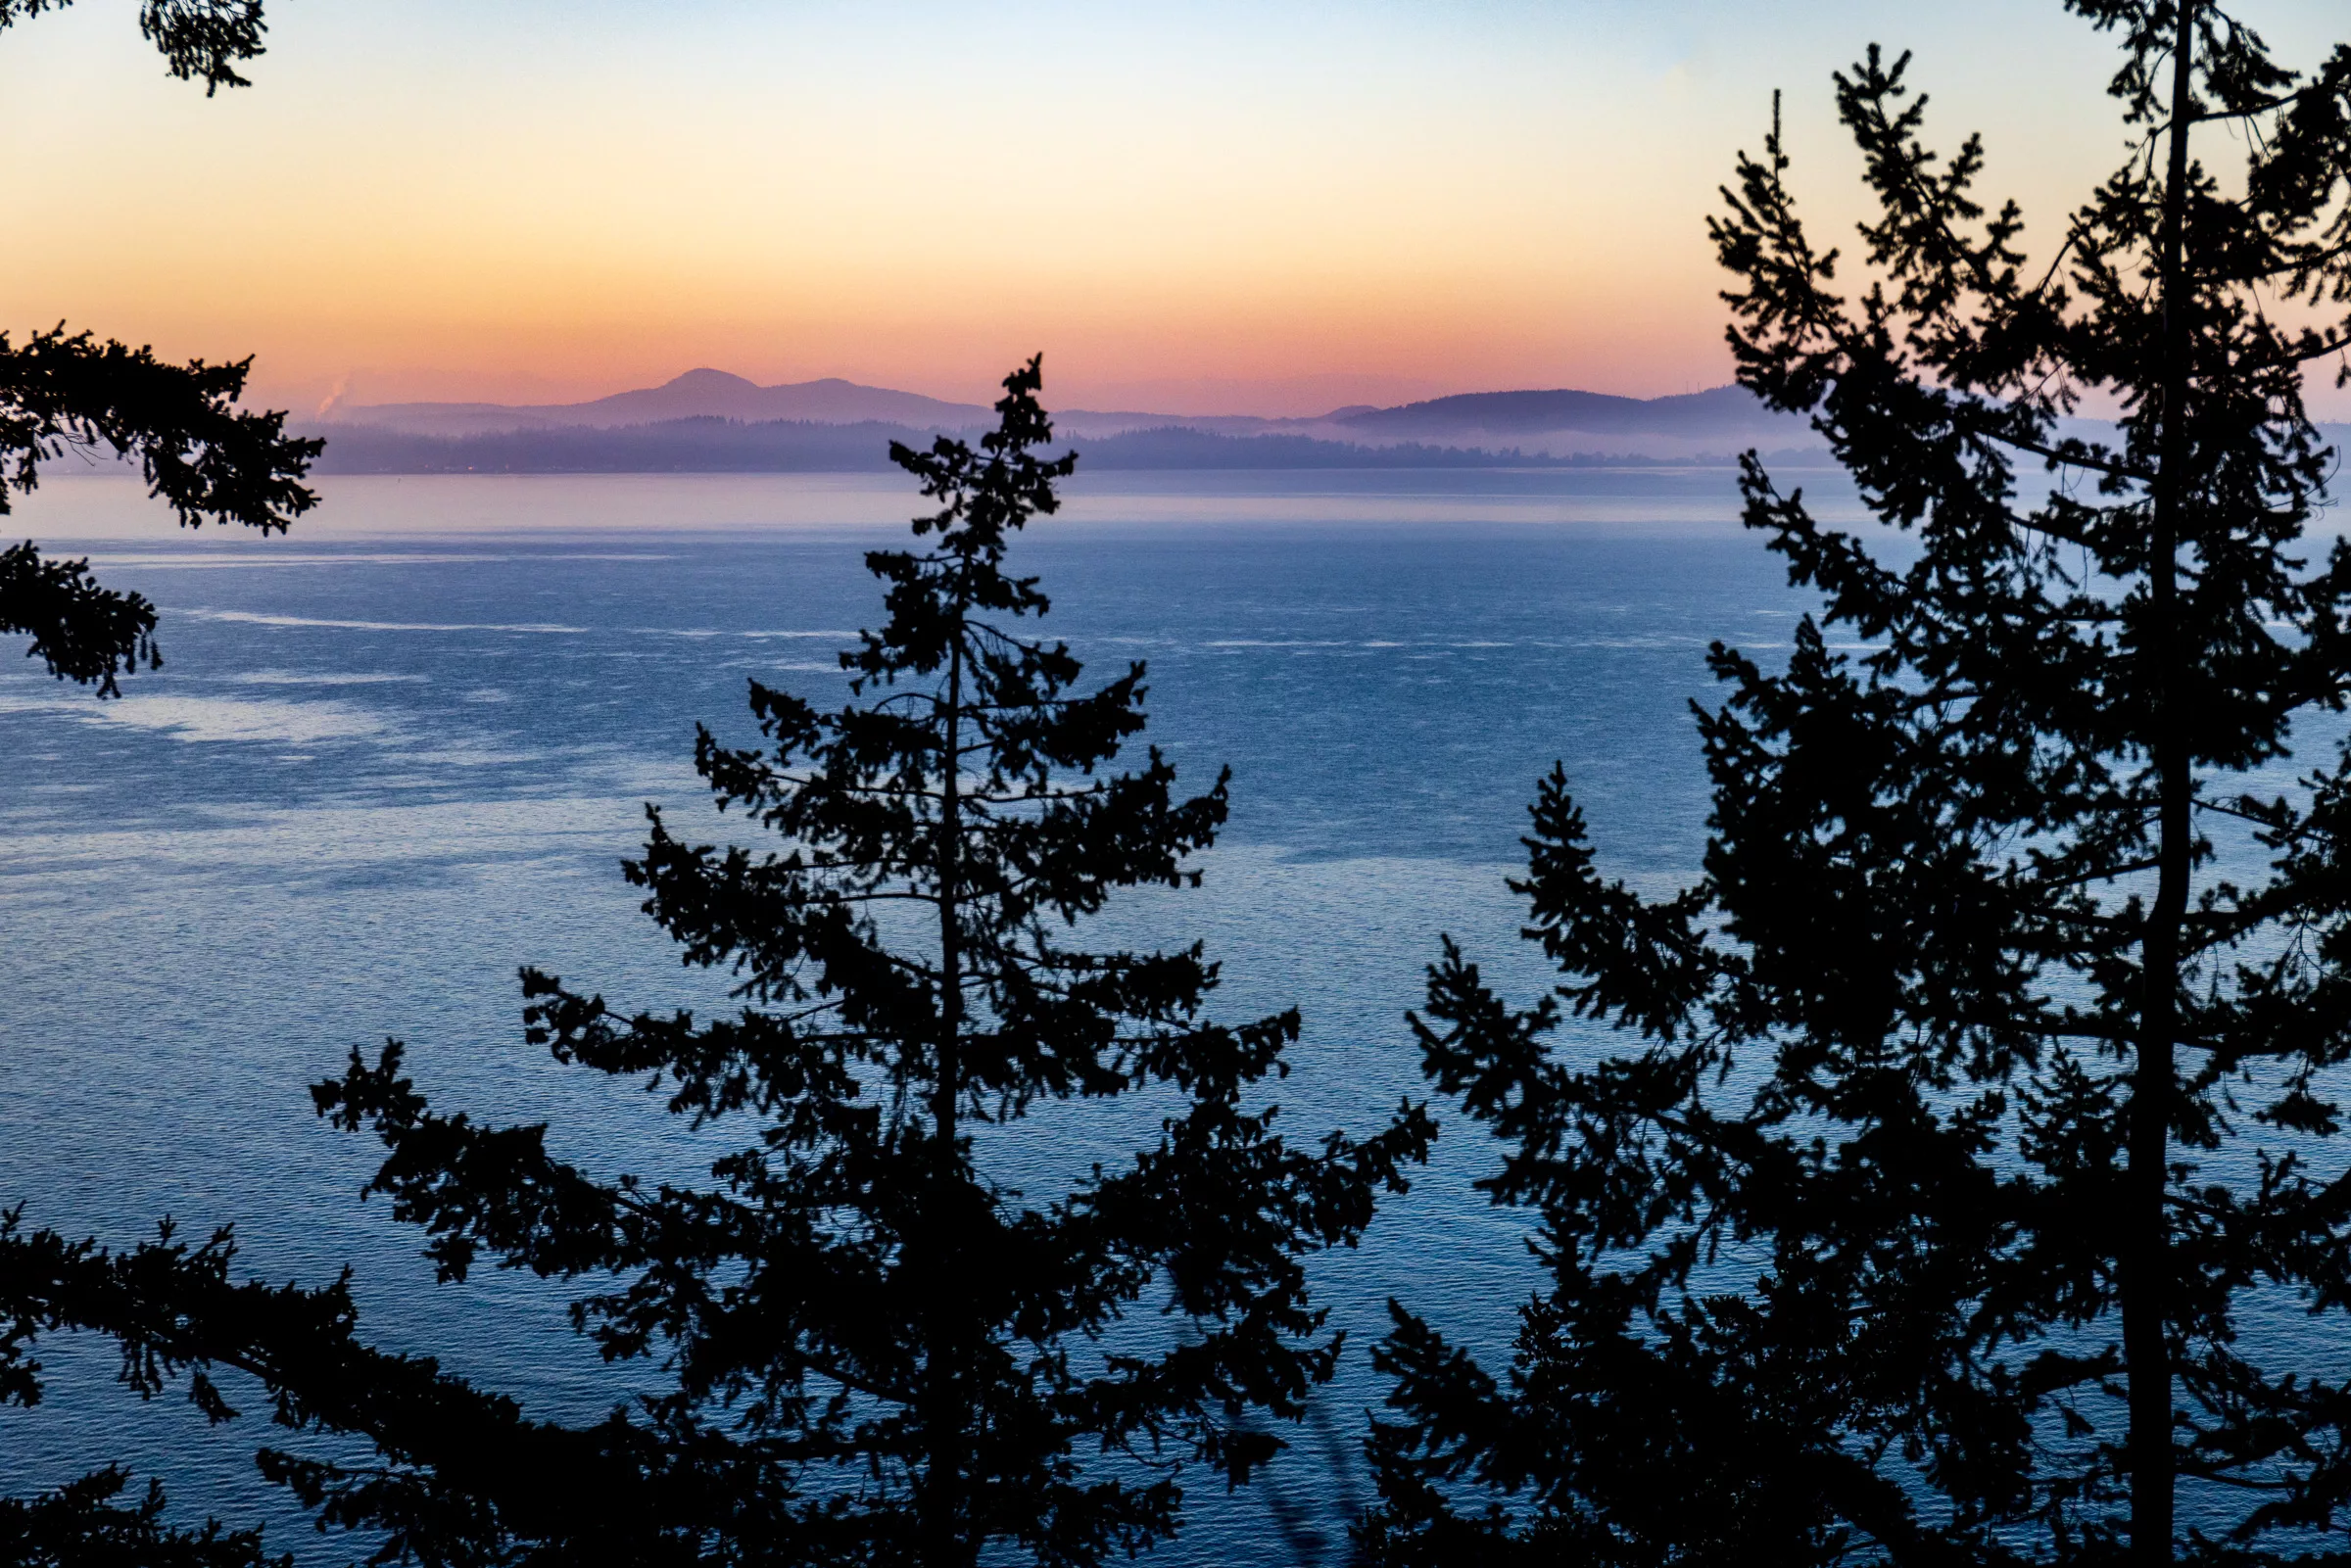 Sunrise in Whatcom Count at Larrabee State Park in Bellingham, Washington